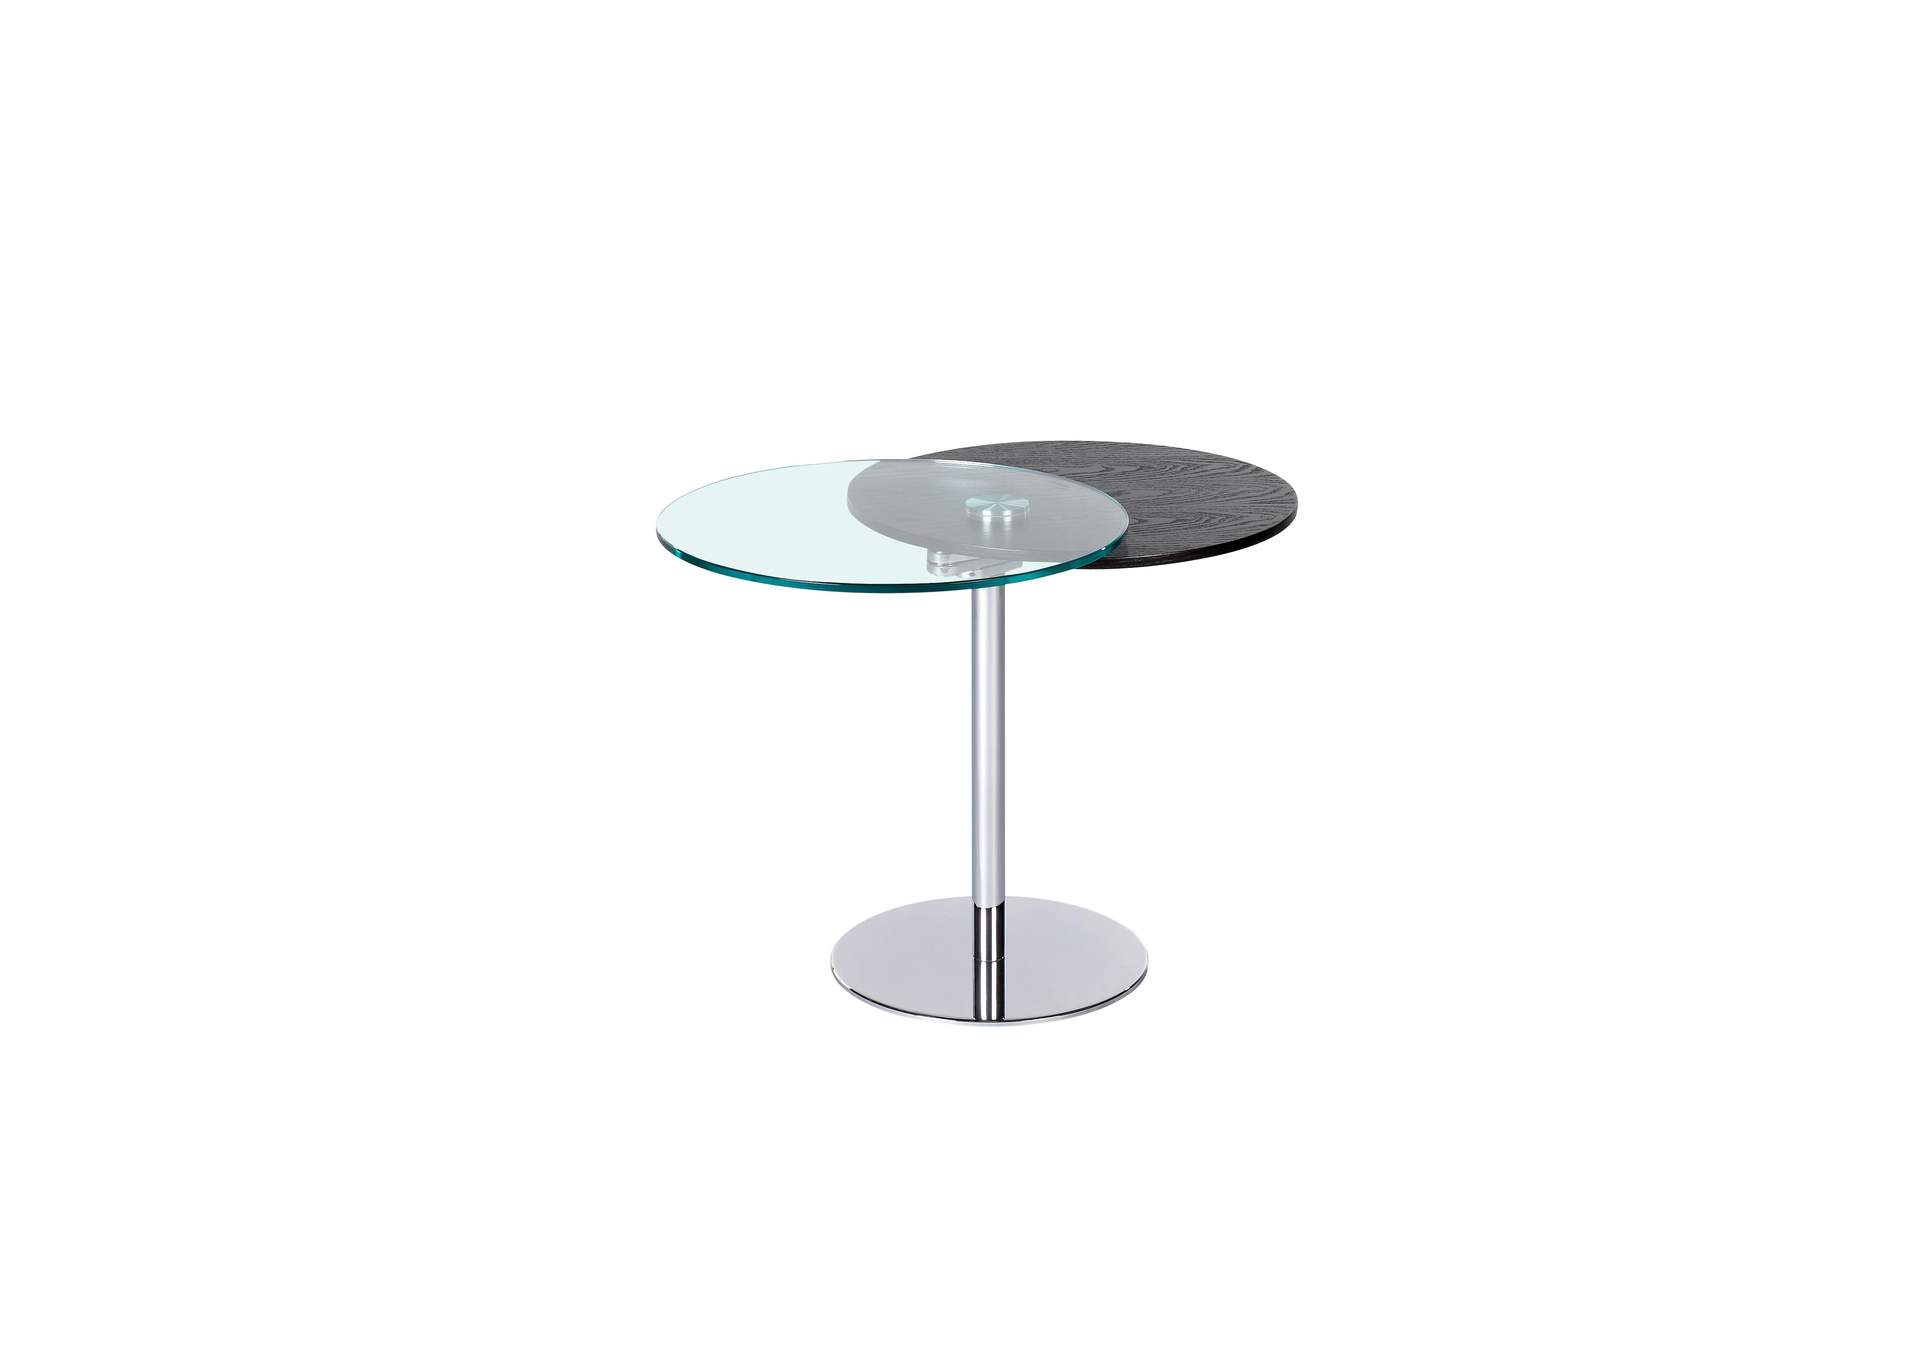 Merlot & Chrome Contemporary Glass Top Motion Lamp Table,Chintaly Imports